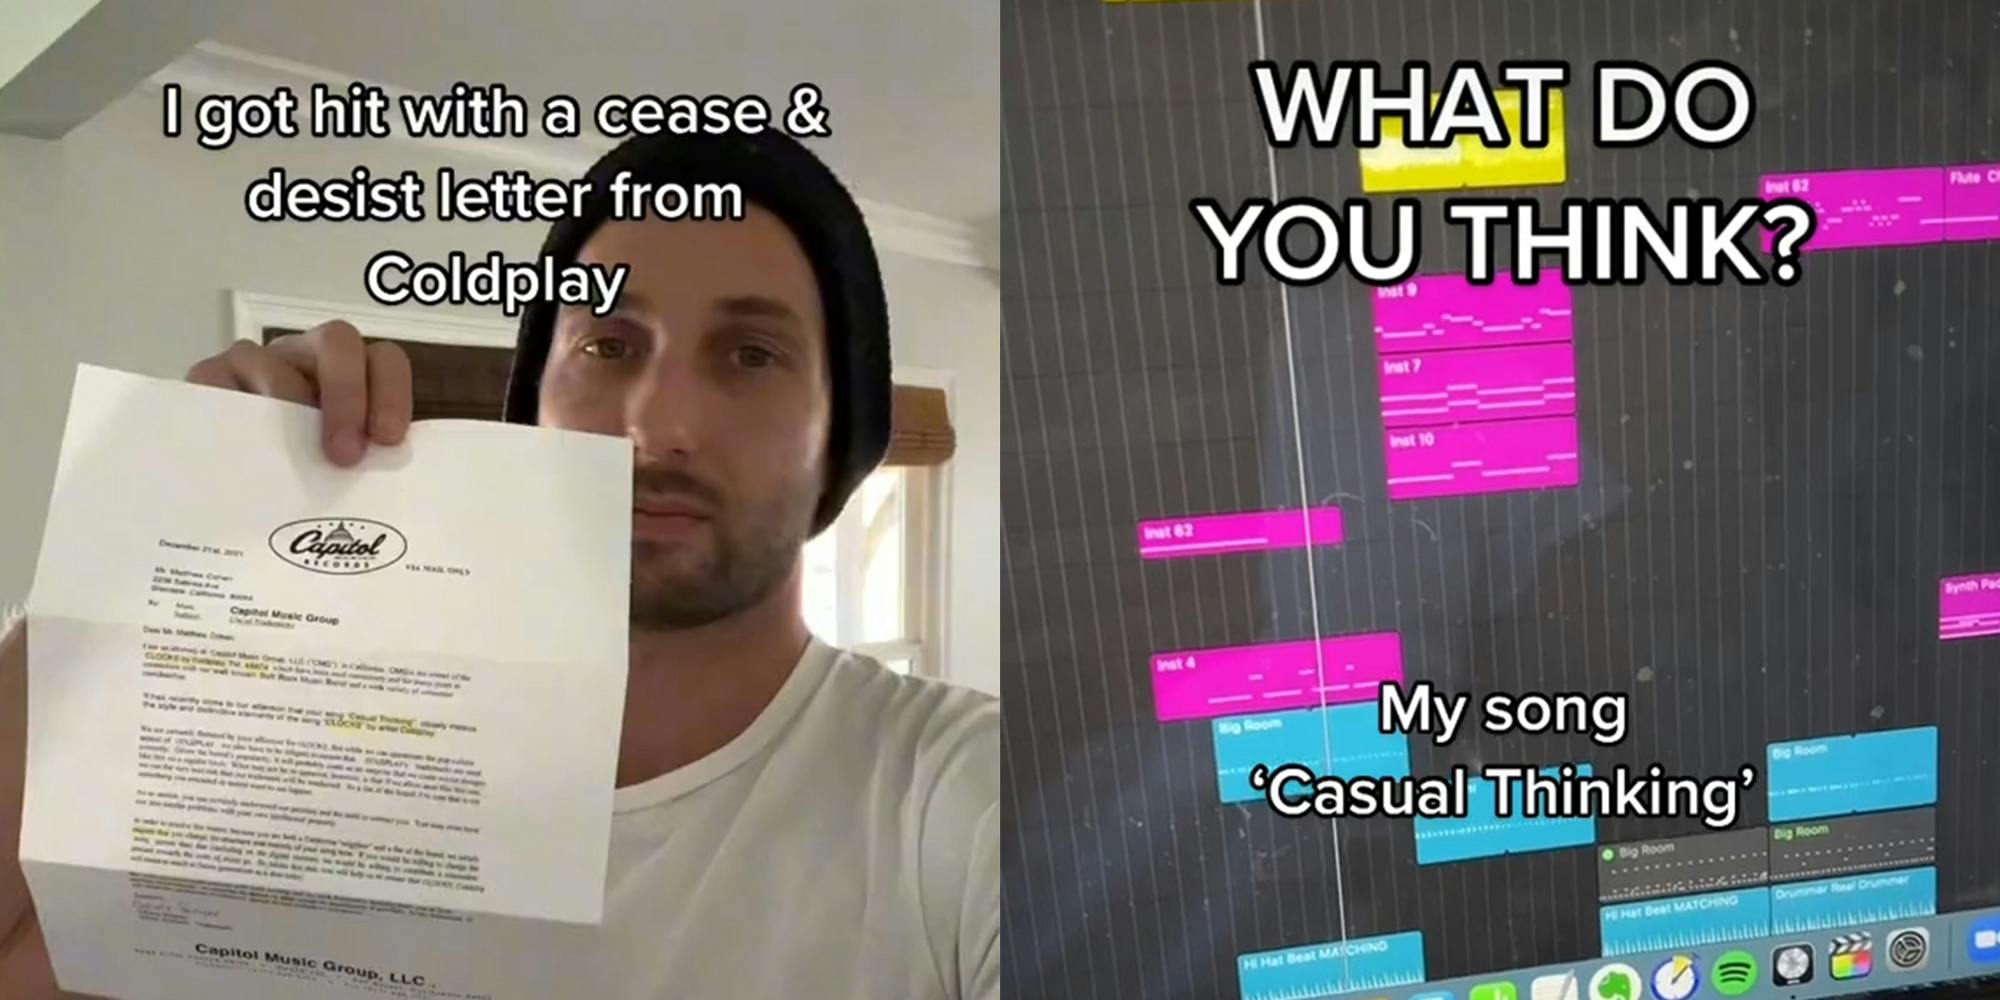 man in beanie holding paper with Capitol Records logo and caption "I got hit with a cease & desist letter from Coldplay" (l) music program with caption "WHAT DO YOU THINK? My song 'Casual Thinking'" (r)